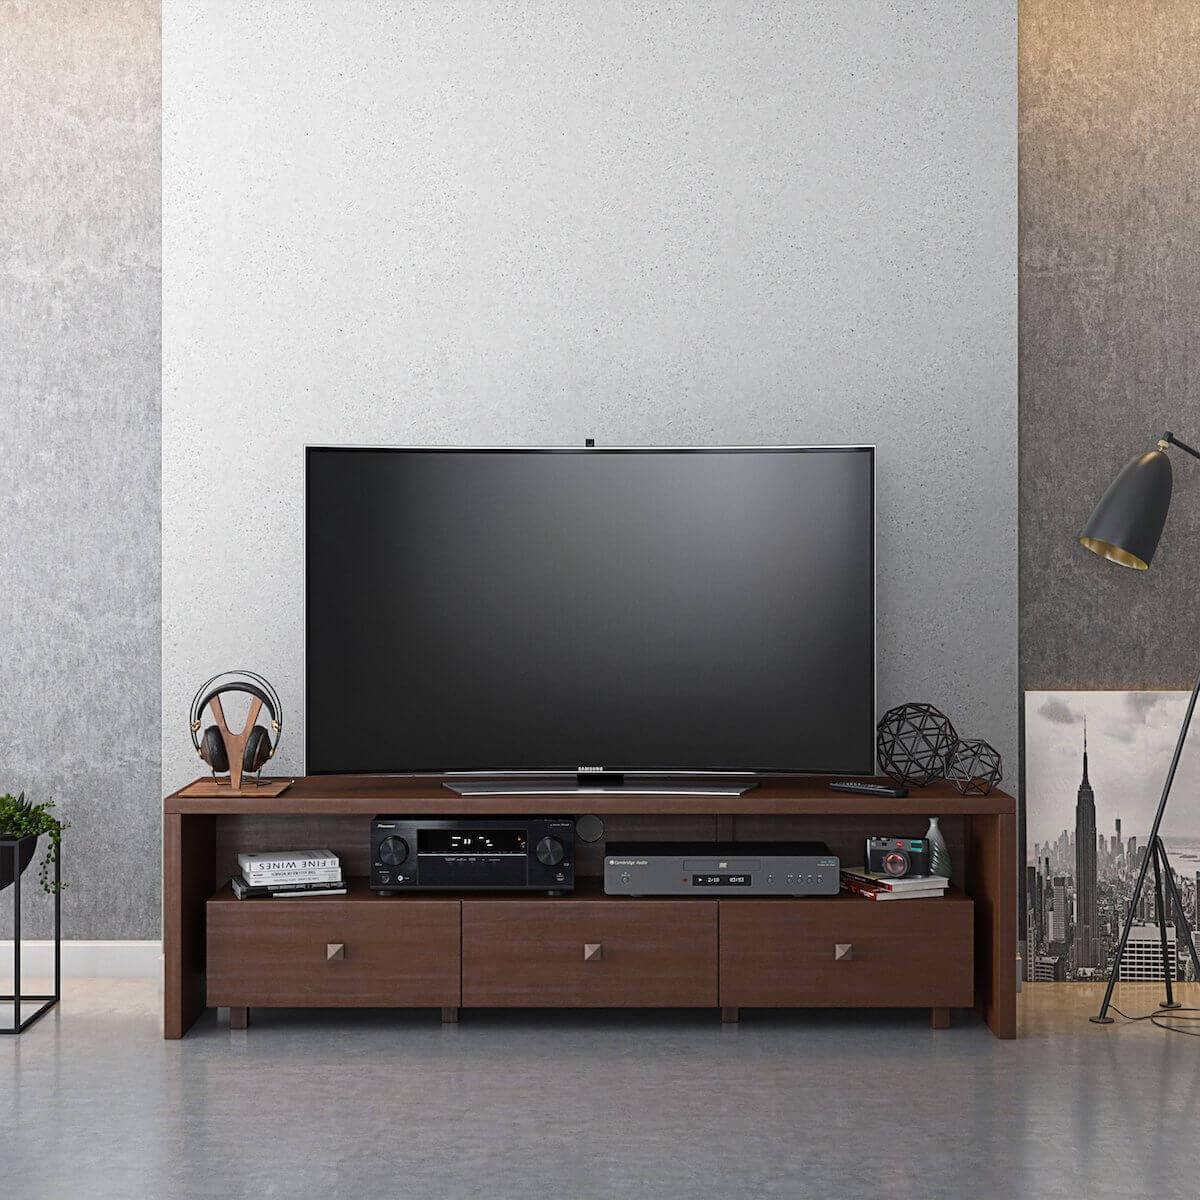 Techni Mobili Hickory Elegant TV Stand for TV's Up To 75" with Storage RTA-8895-HRY with TV in Room